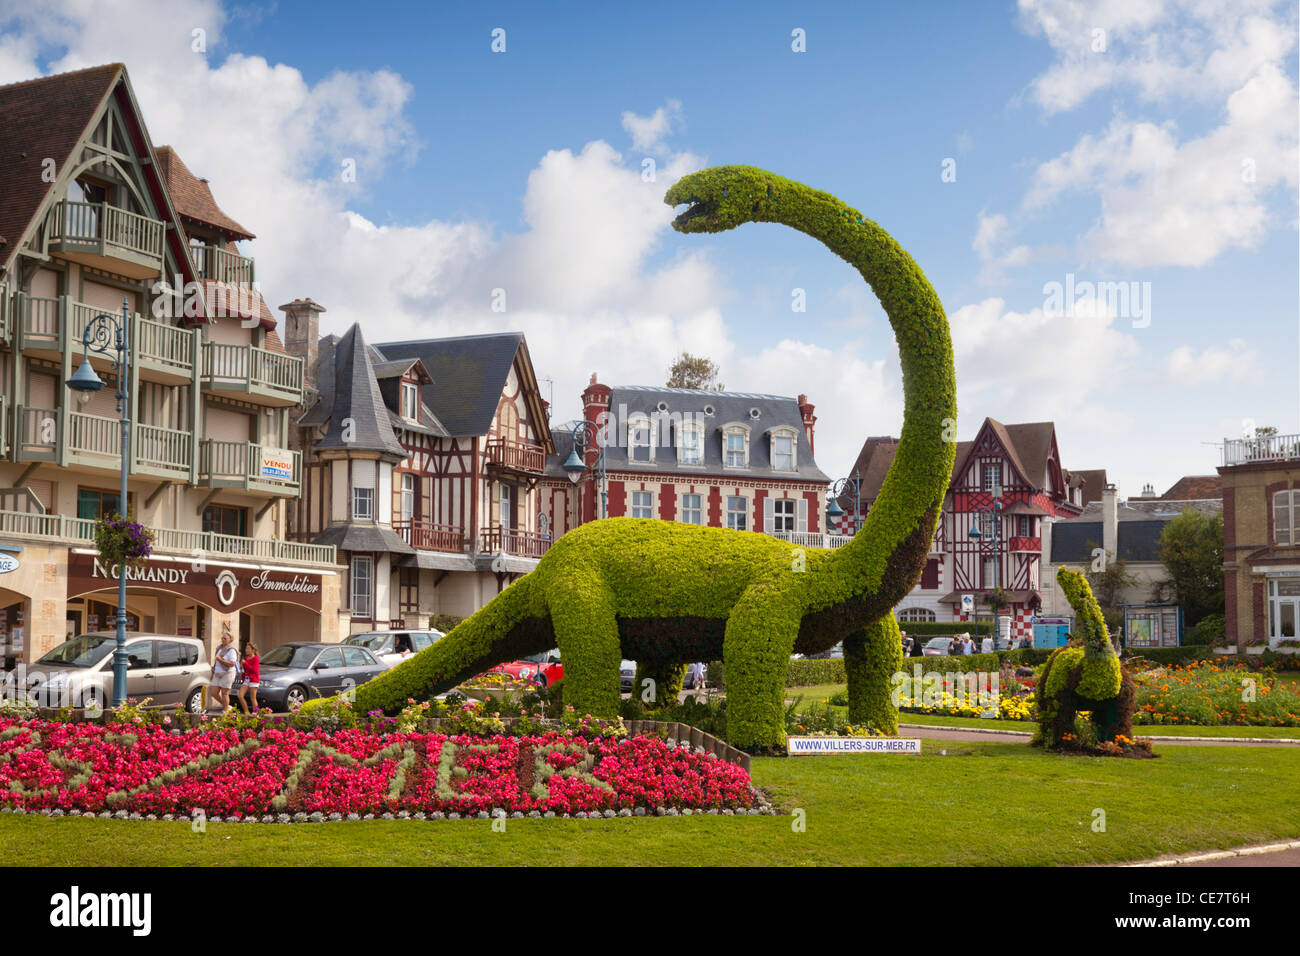 Topiary dinosaur in the centre of the seaside town of Villers-sur-Mer, Normandy, France. Stock Photo